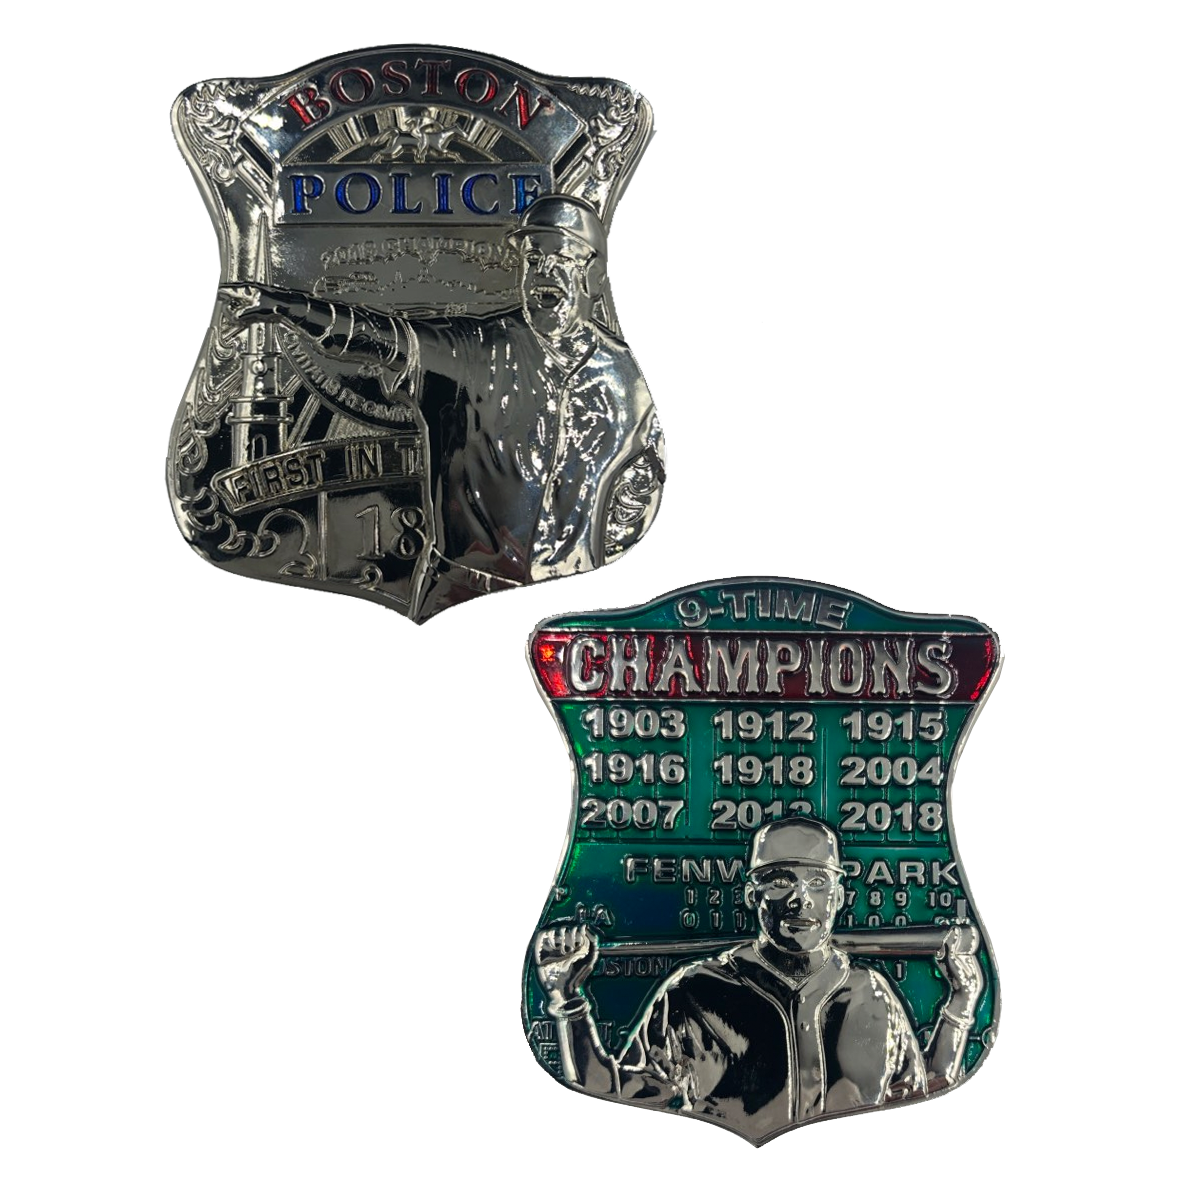 KK-007 Boston Police Red Sox inspired 9 Time Champions Challenge Coin